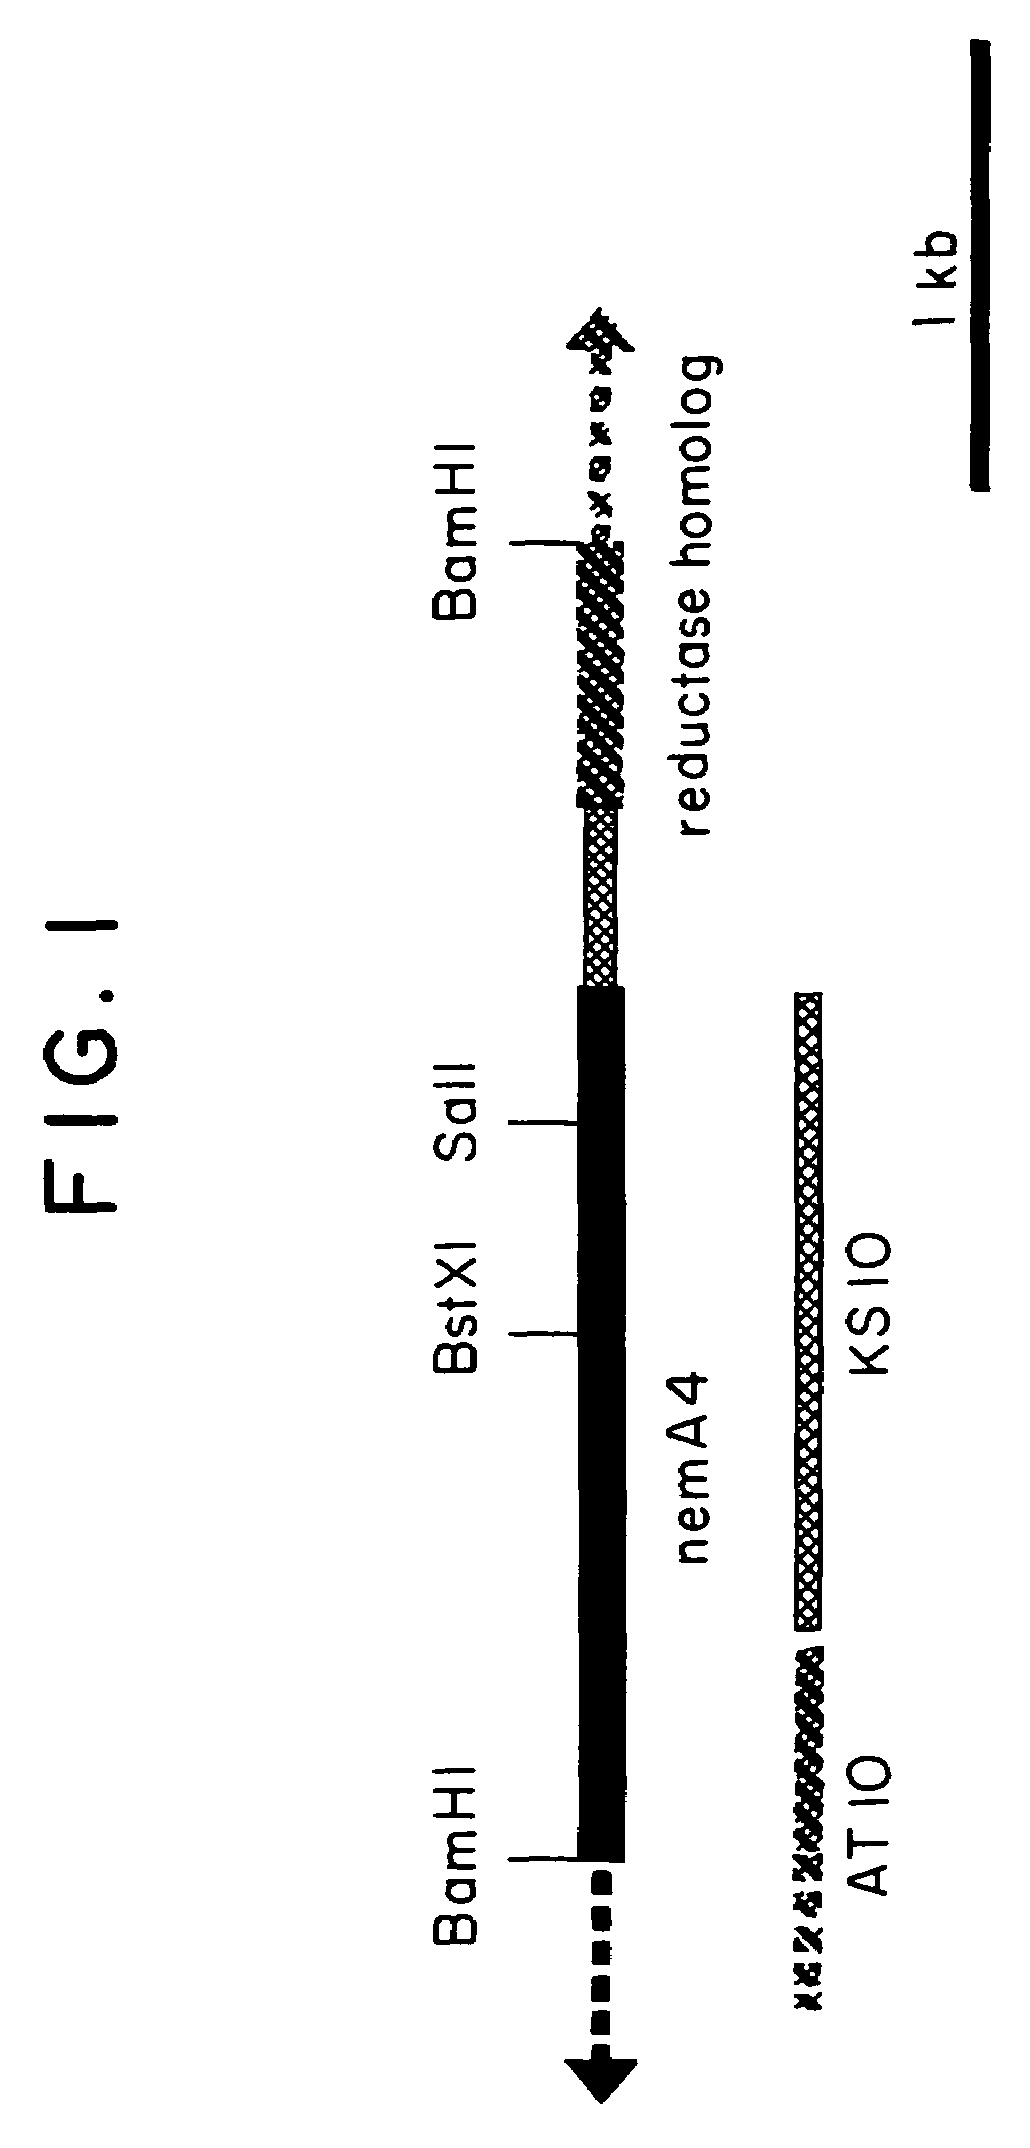 Strain belonging to the genus Streptomyces and being capable of producing nemadictin and process for producing nemadictin using the strain